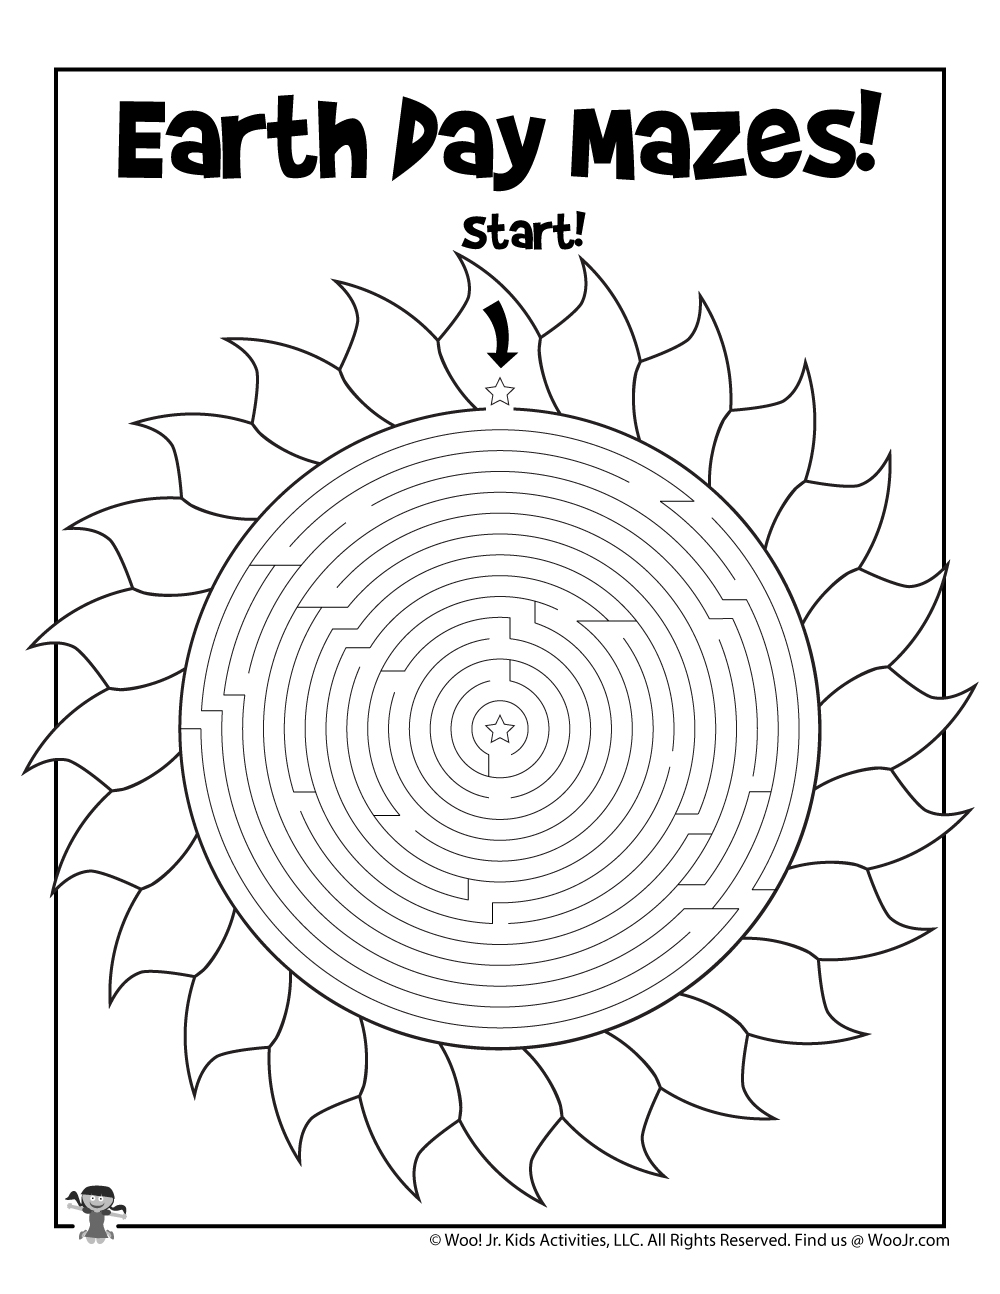 Printable earth day mazes woo jr kids activities childrens publishing